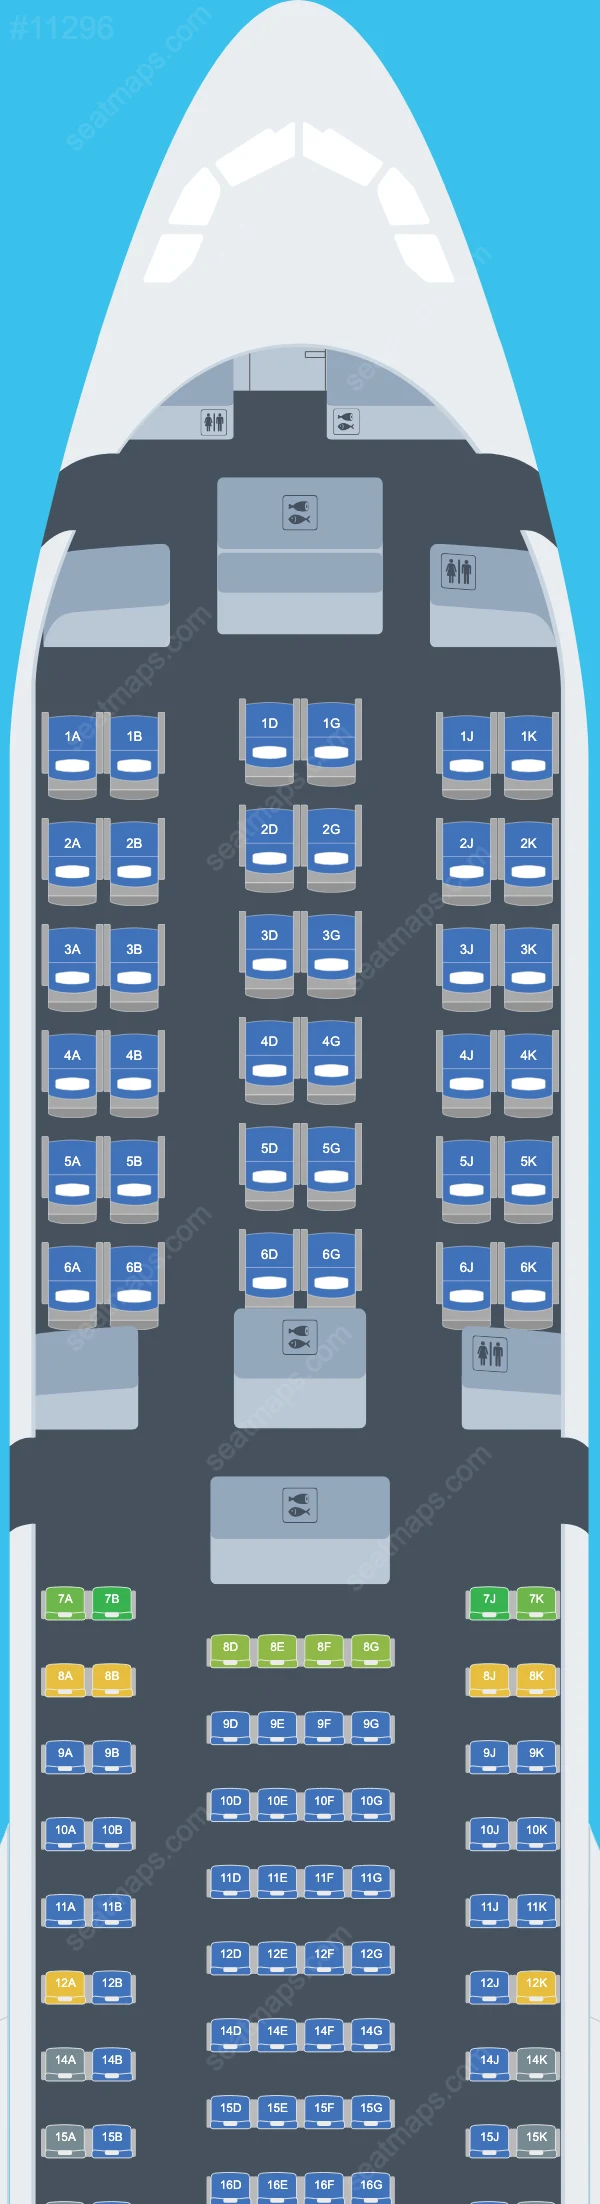 flyCAA Airbus A330-300 seatmap preview